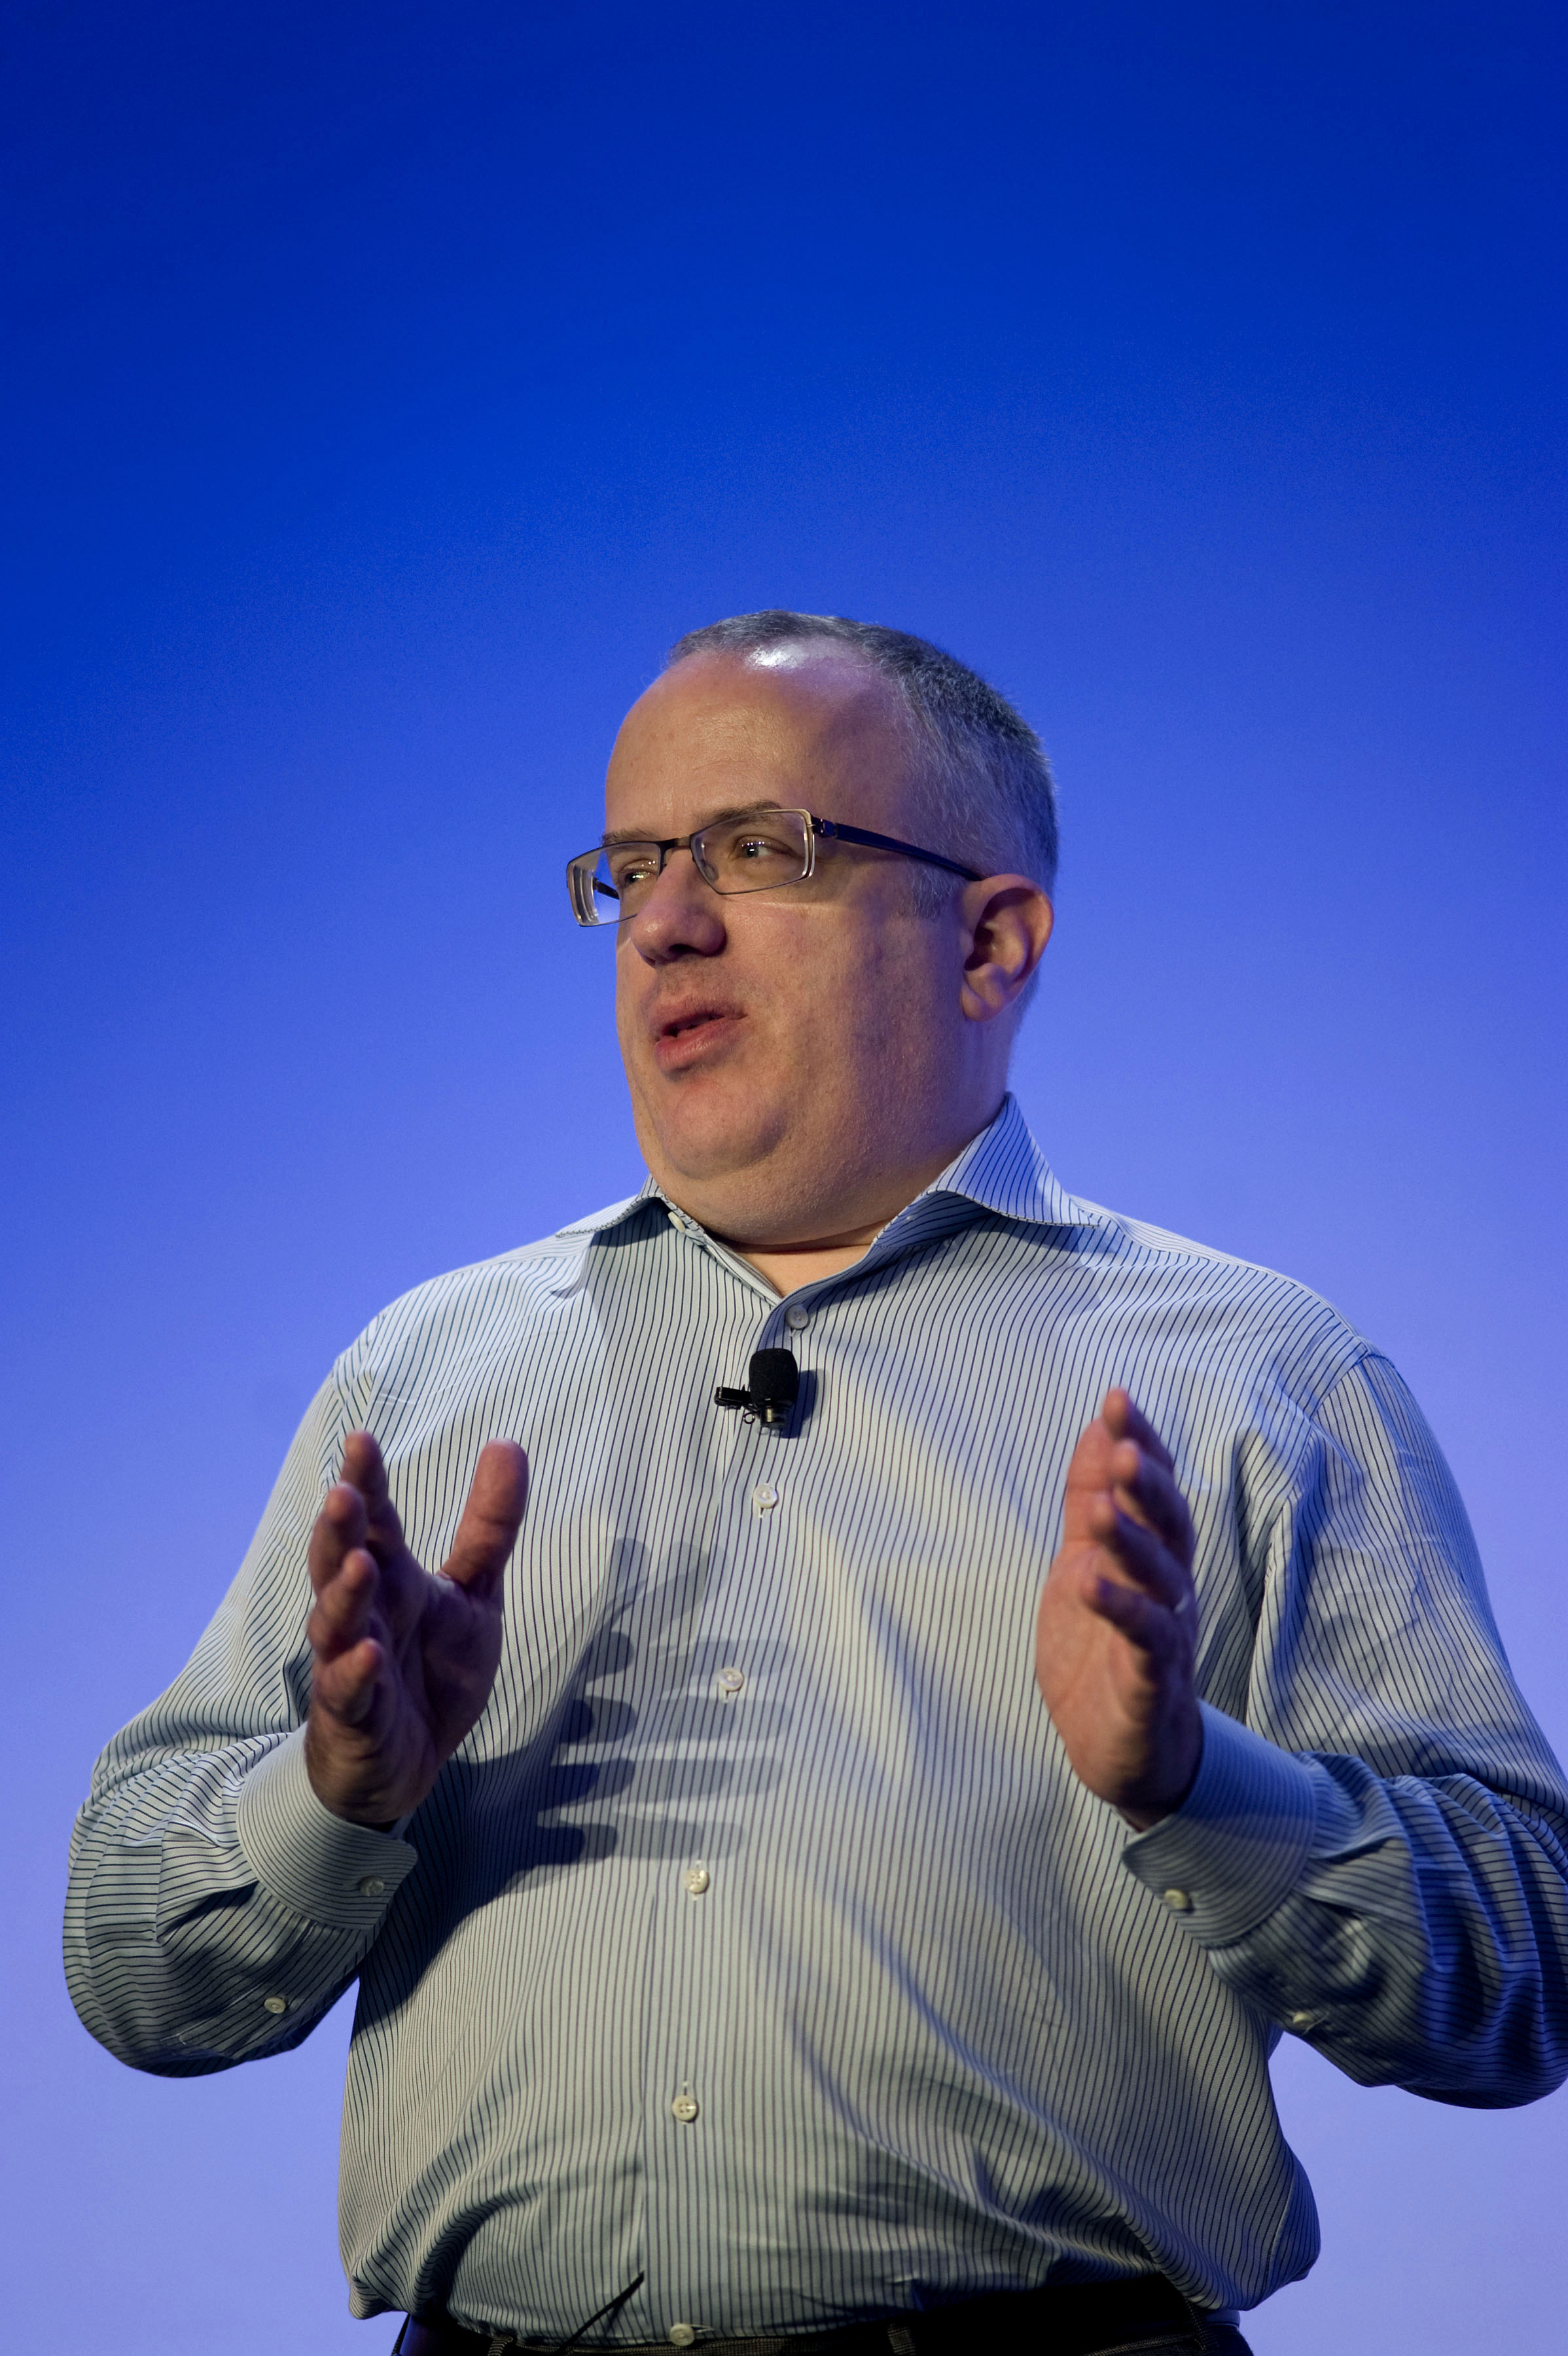 Inside The 2013 Uplinq Mobile Technology Conference